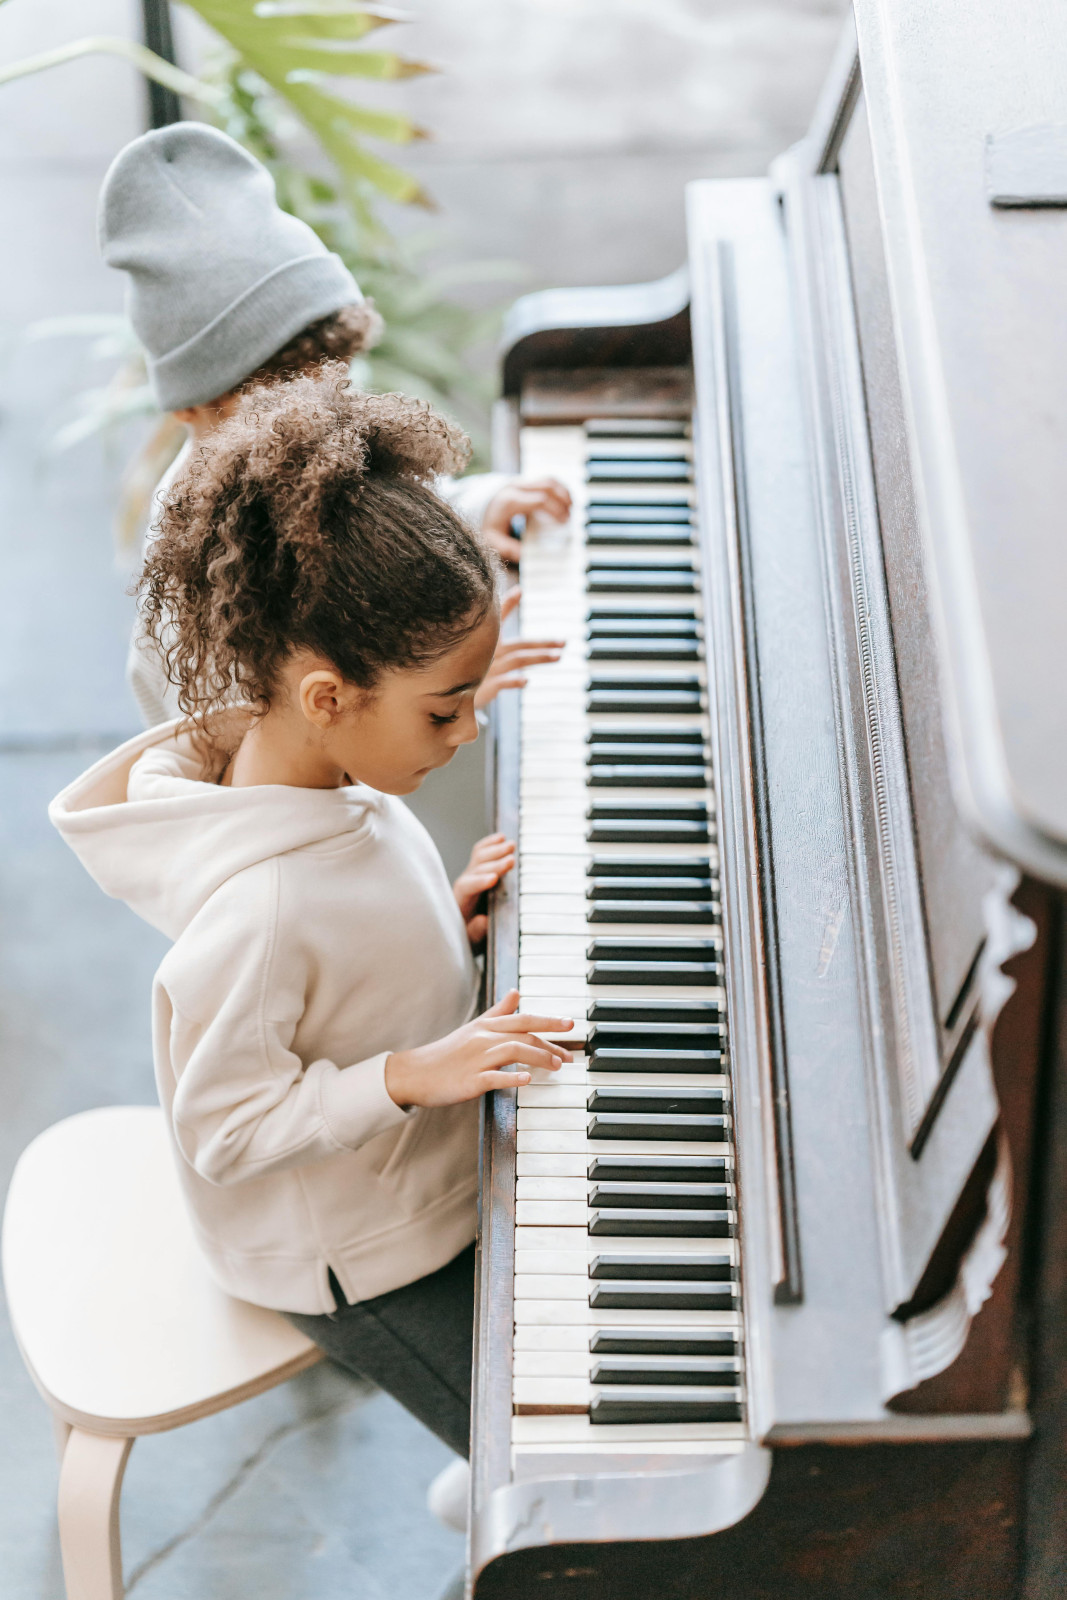 What Non-Musical Skills Every Homeschooler Can Grow in by Playing a Musical Instrument